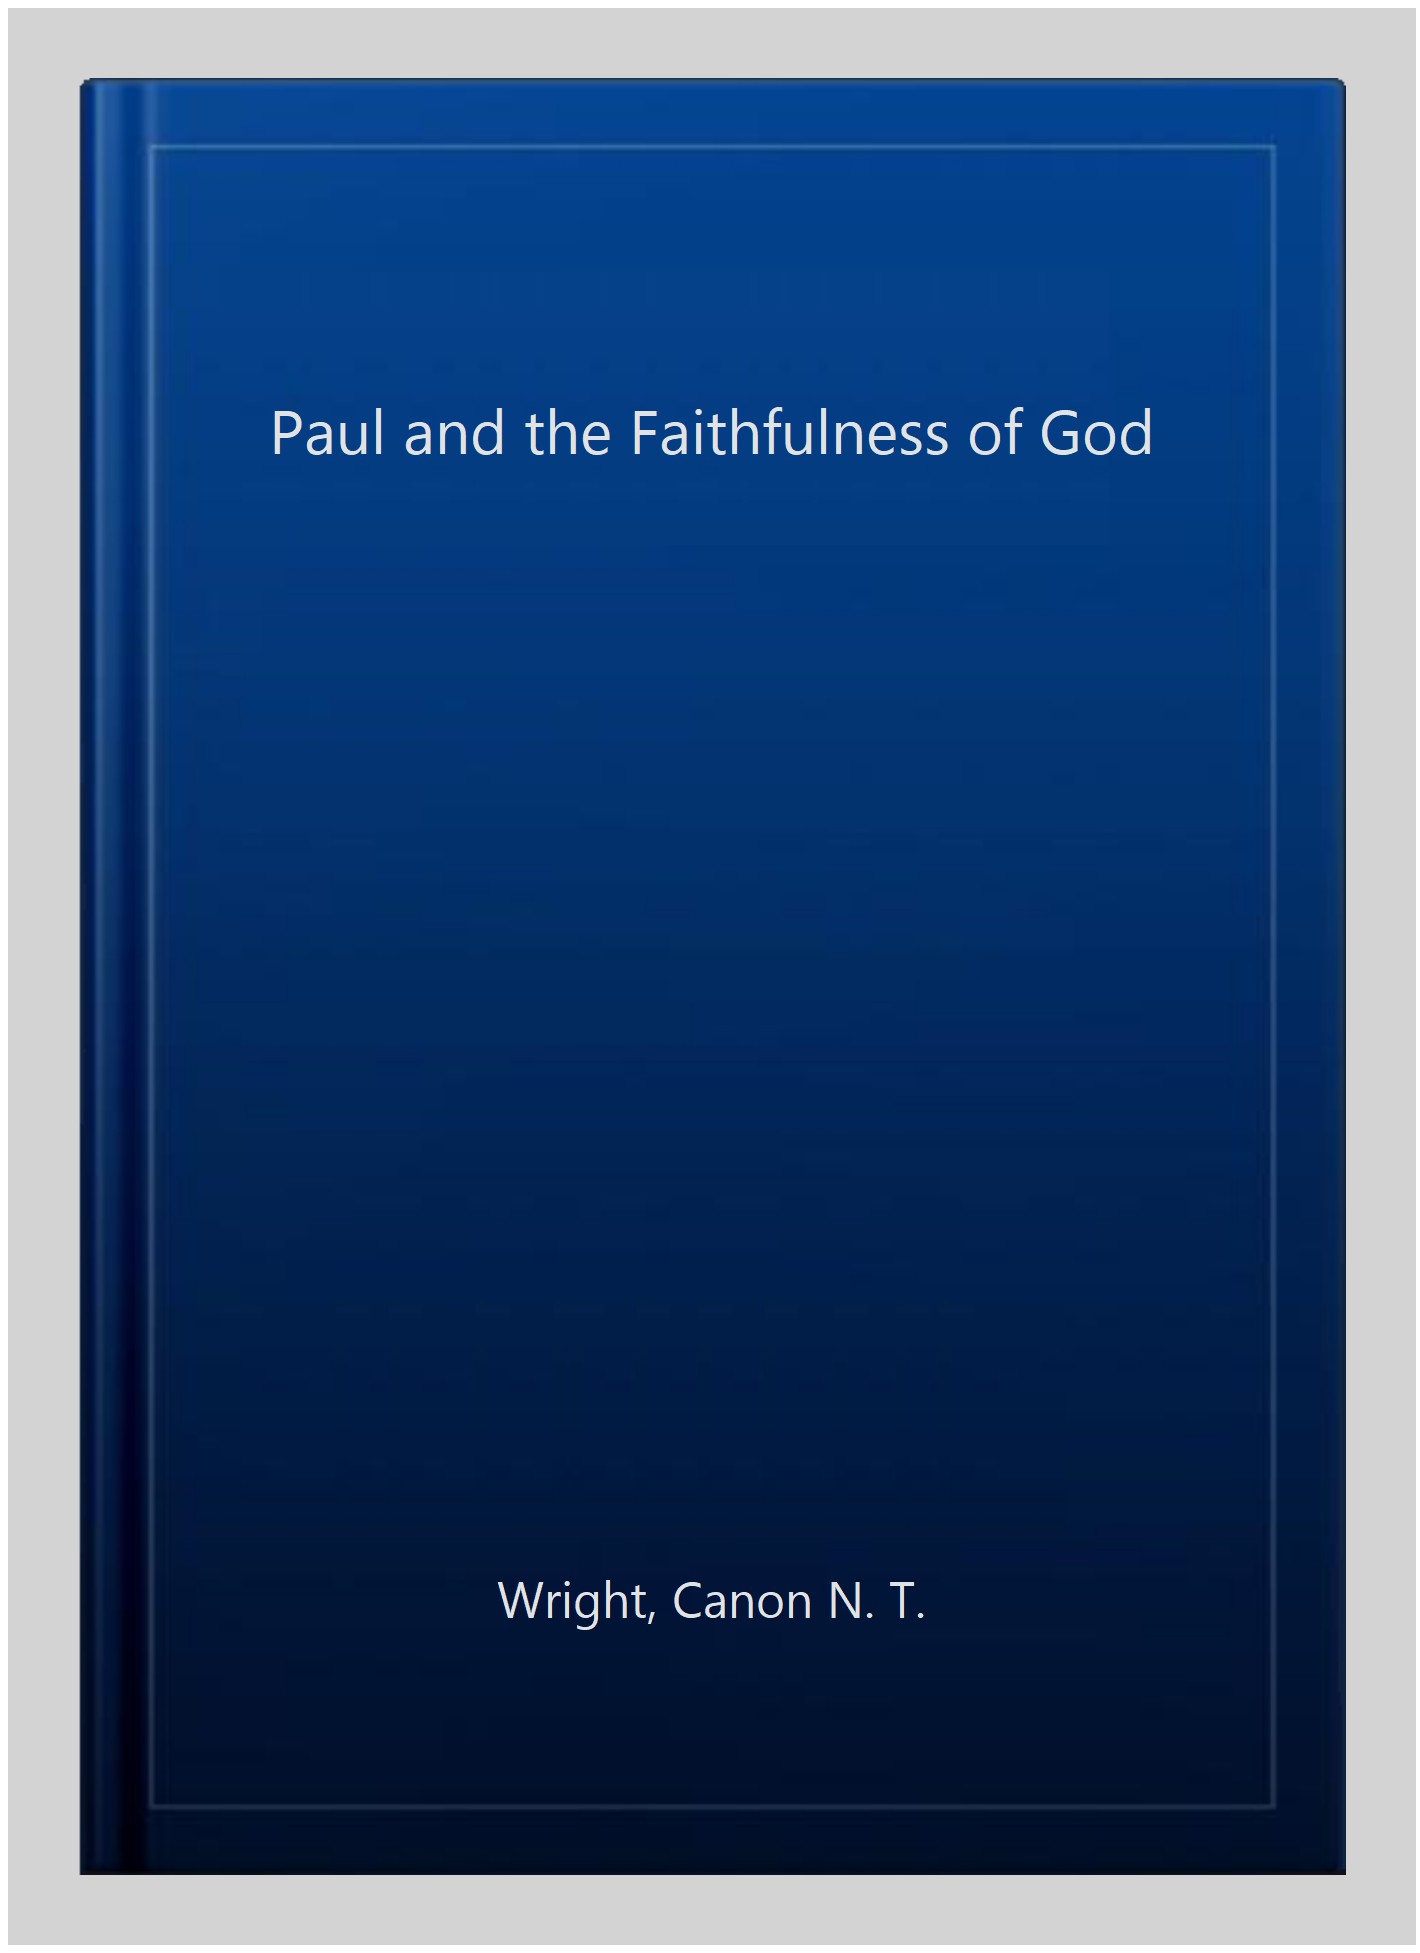 Paul and the Faithfulness of God - Wright, Canon N. T.